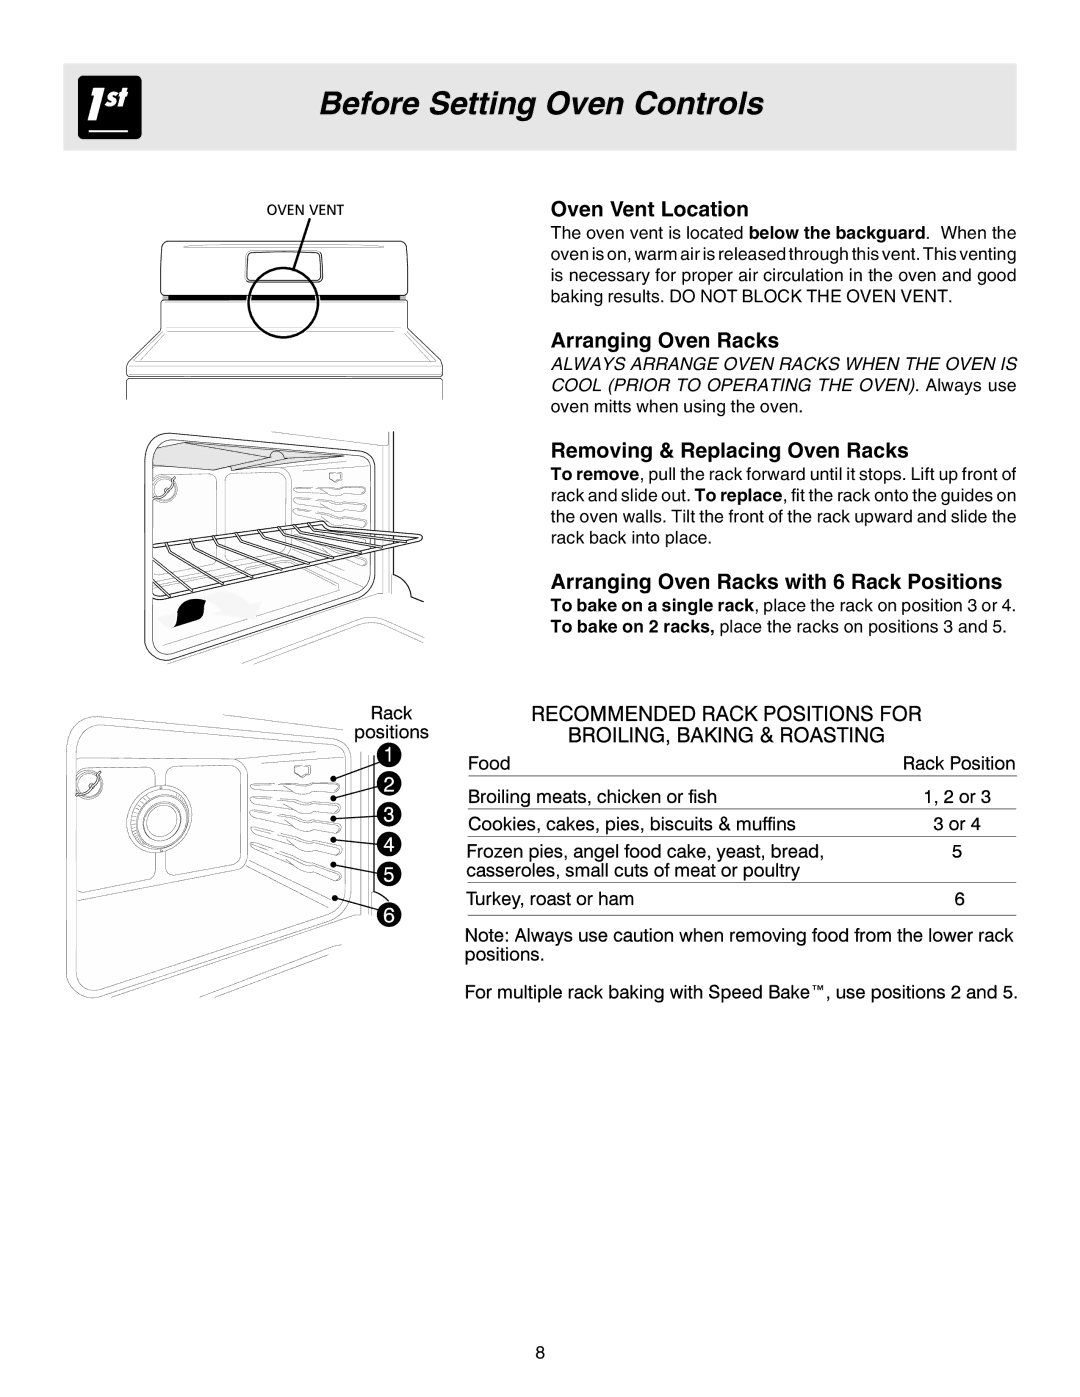 Electrolux ES200/300 manual Before Setting Oven Controls, Oven Vent Location, Arranging Oven Racks 